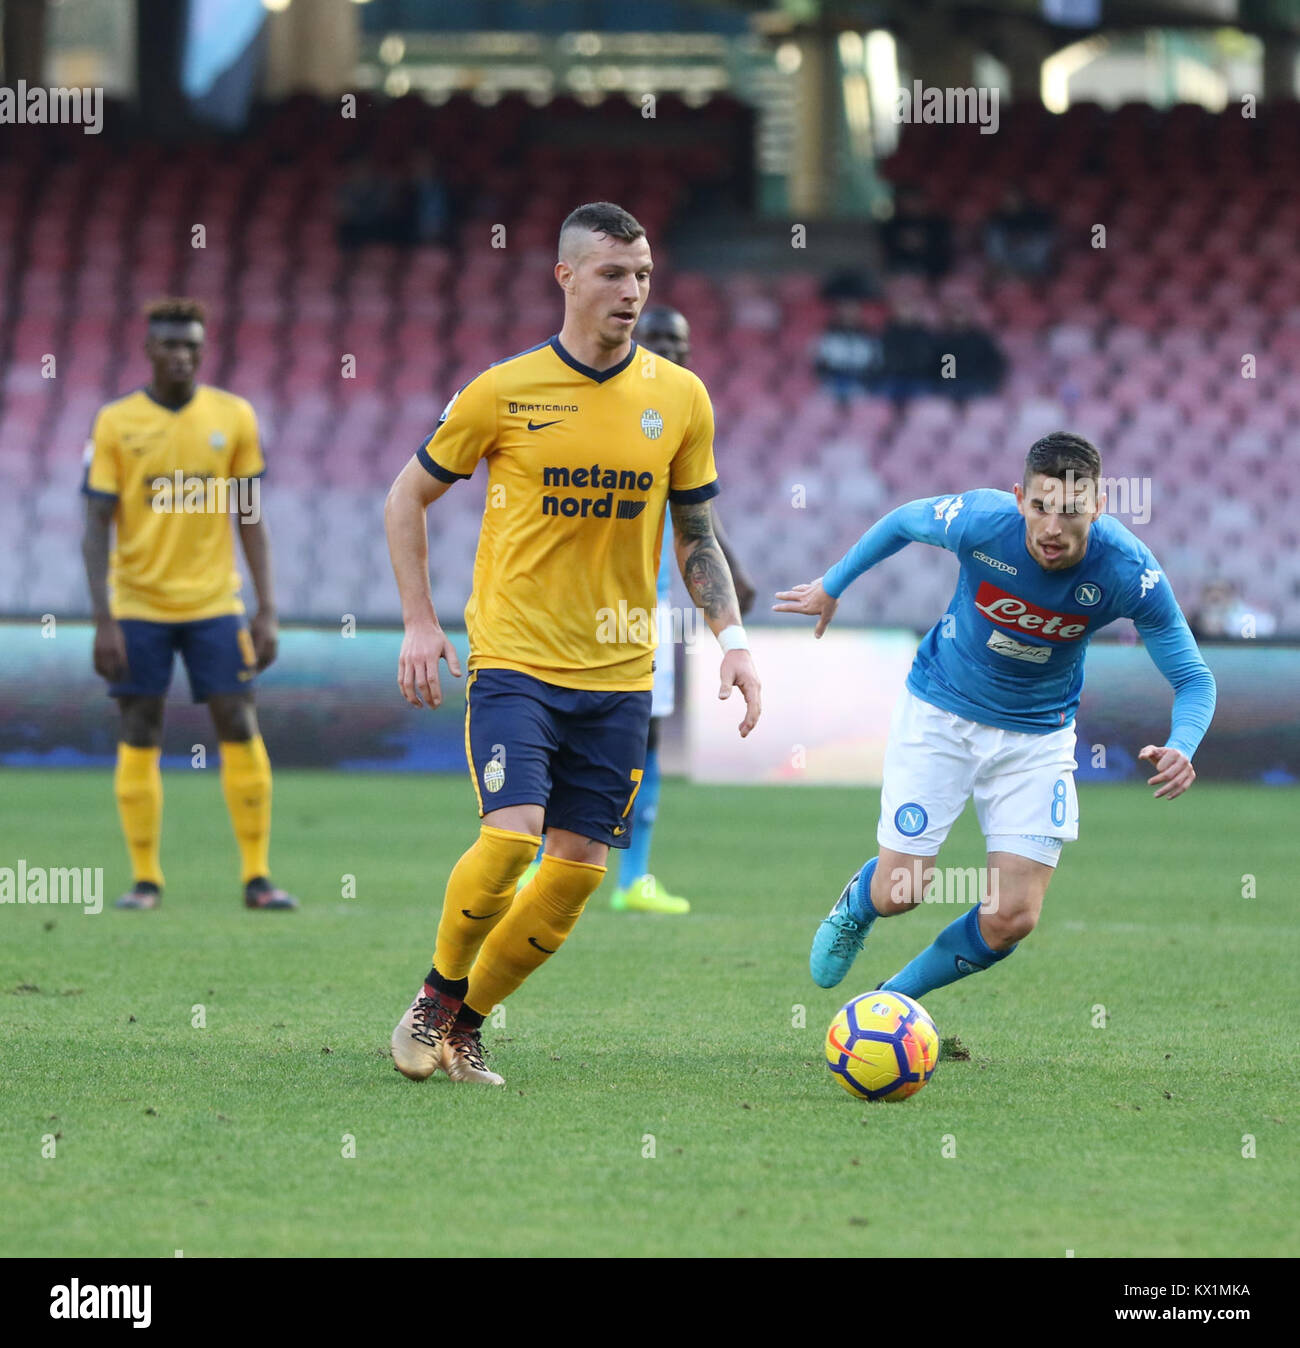 January 6, 2018 - Naples, Italy, 6 January 2018 - In the picture The player of the Verona Buchel drips with the ball. at the San Paolo stadium in Naples, the two teams met with a lot of competitive tenacity. (Credit Image: © Fabio Sasso via ZUMA Wire) Stock Photo